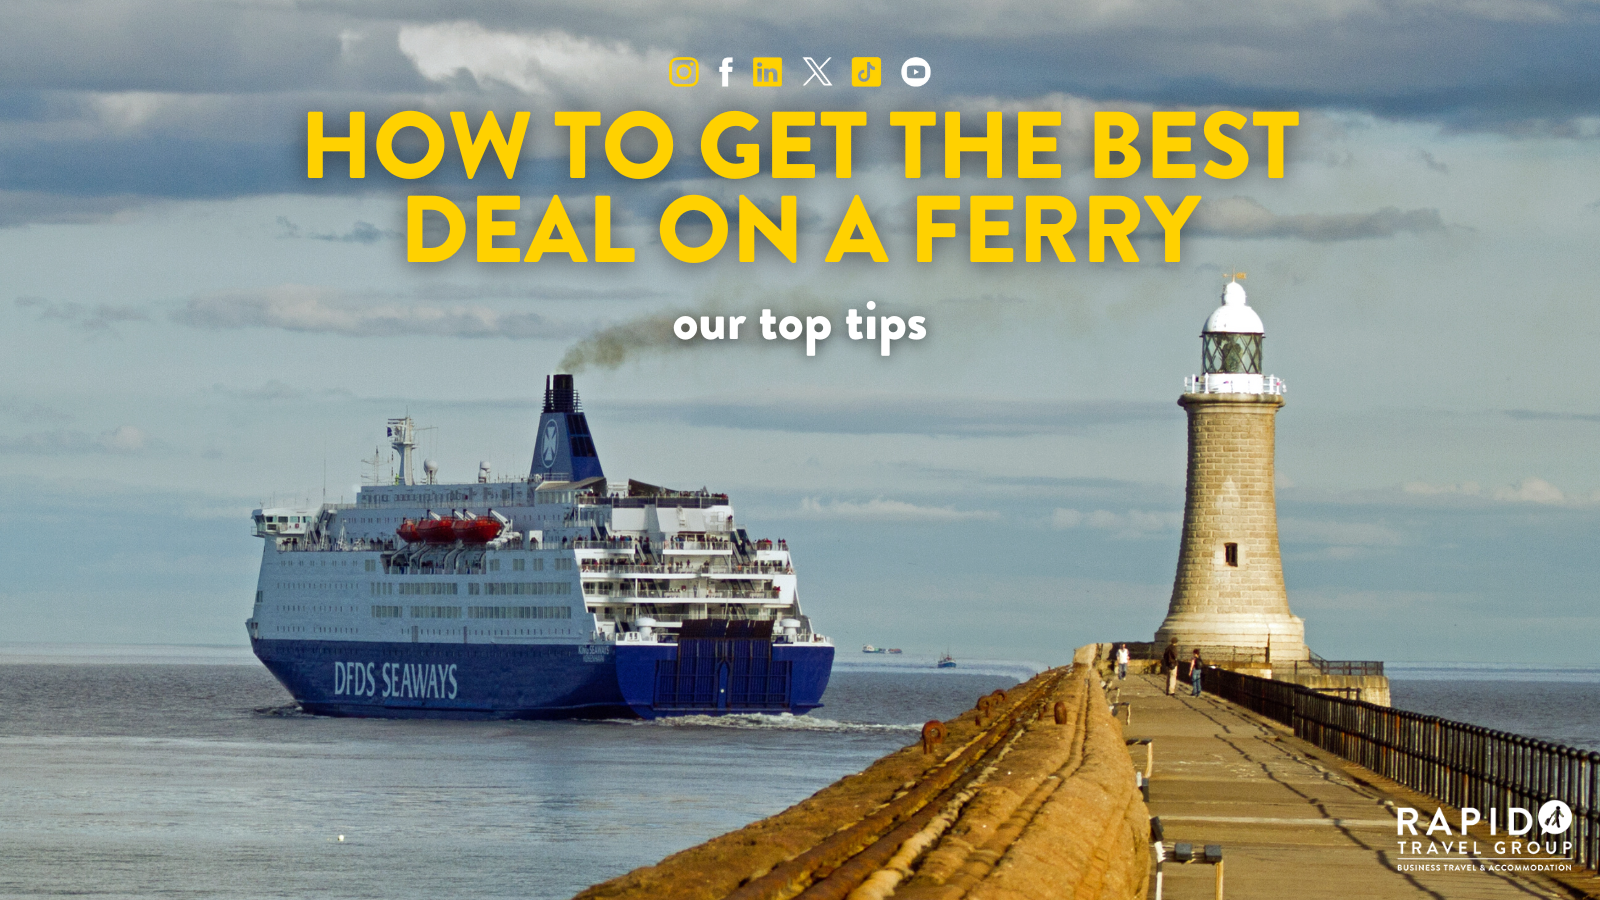 How To Get The Best Deal On A Ferry: Our Top Tips